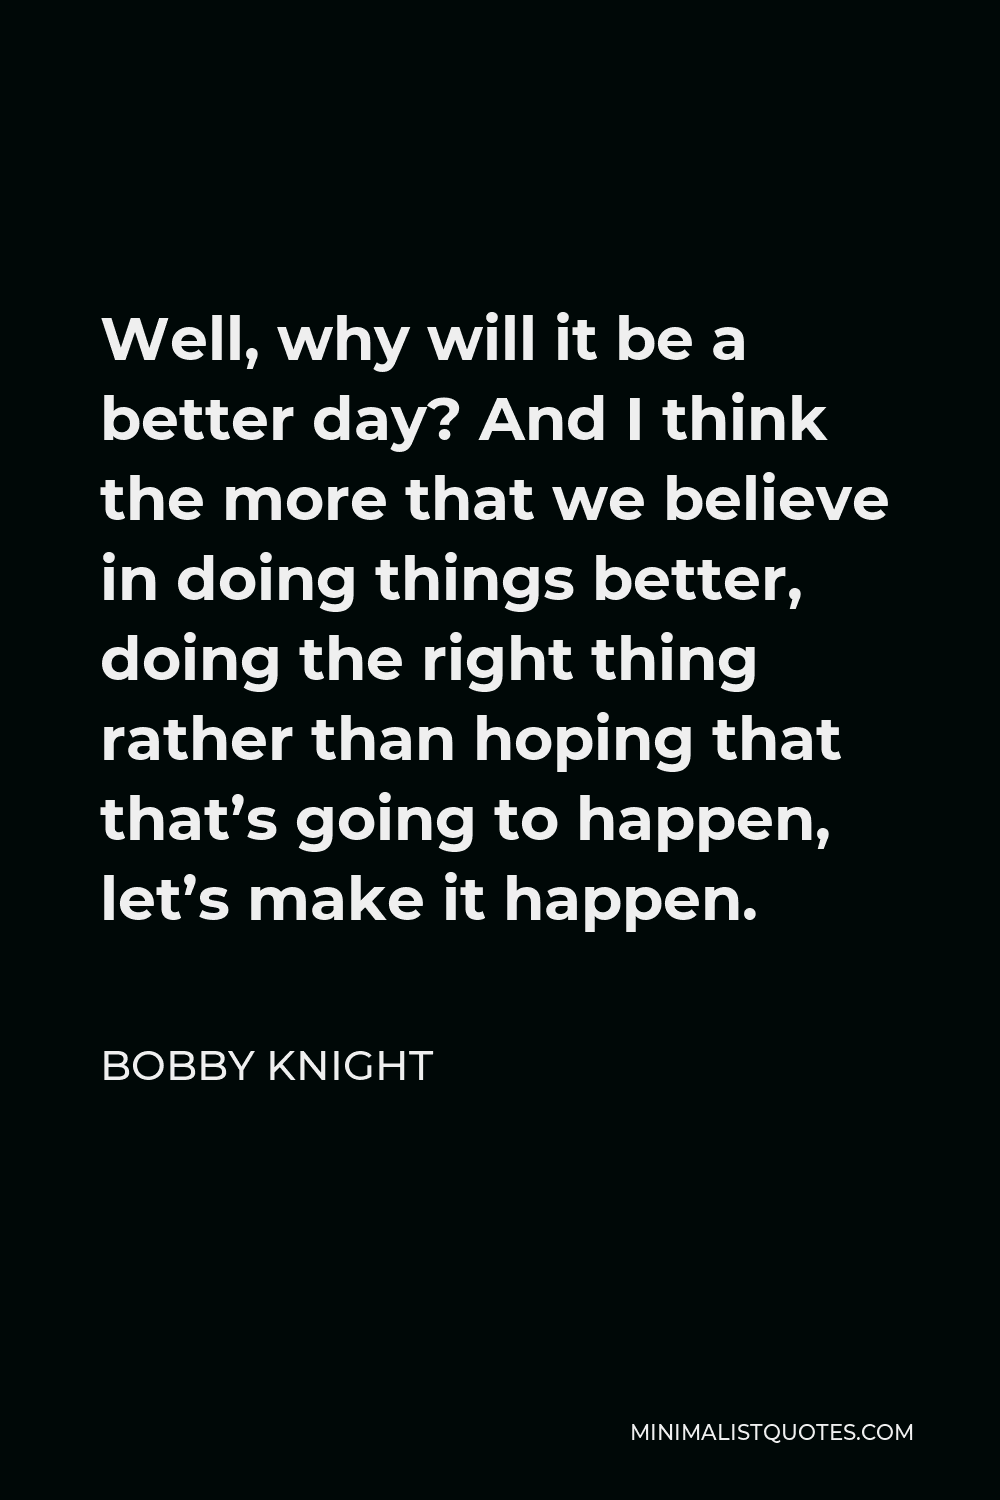 Bobby Knight Quote - Well, why will it be a better day? And I think the more that we believe in doing things better, doing the right thing rather than hoping that that’s going to happen, let’s make it happen.